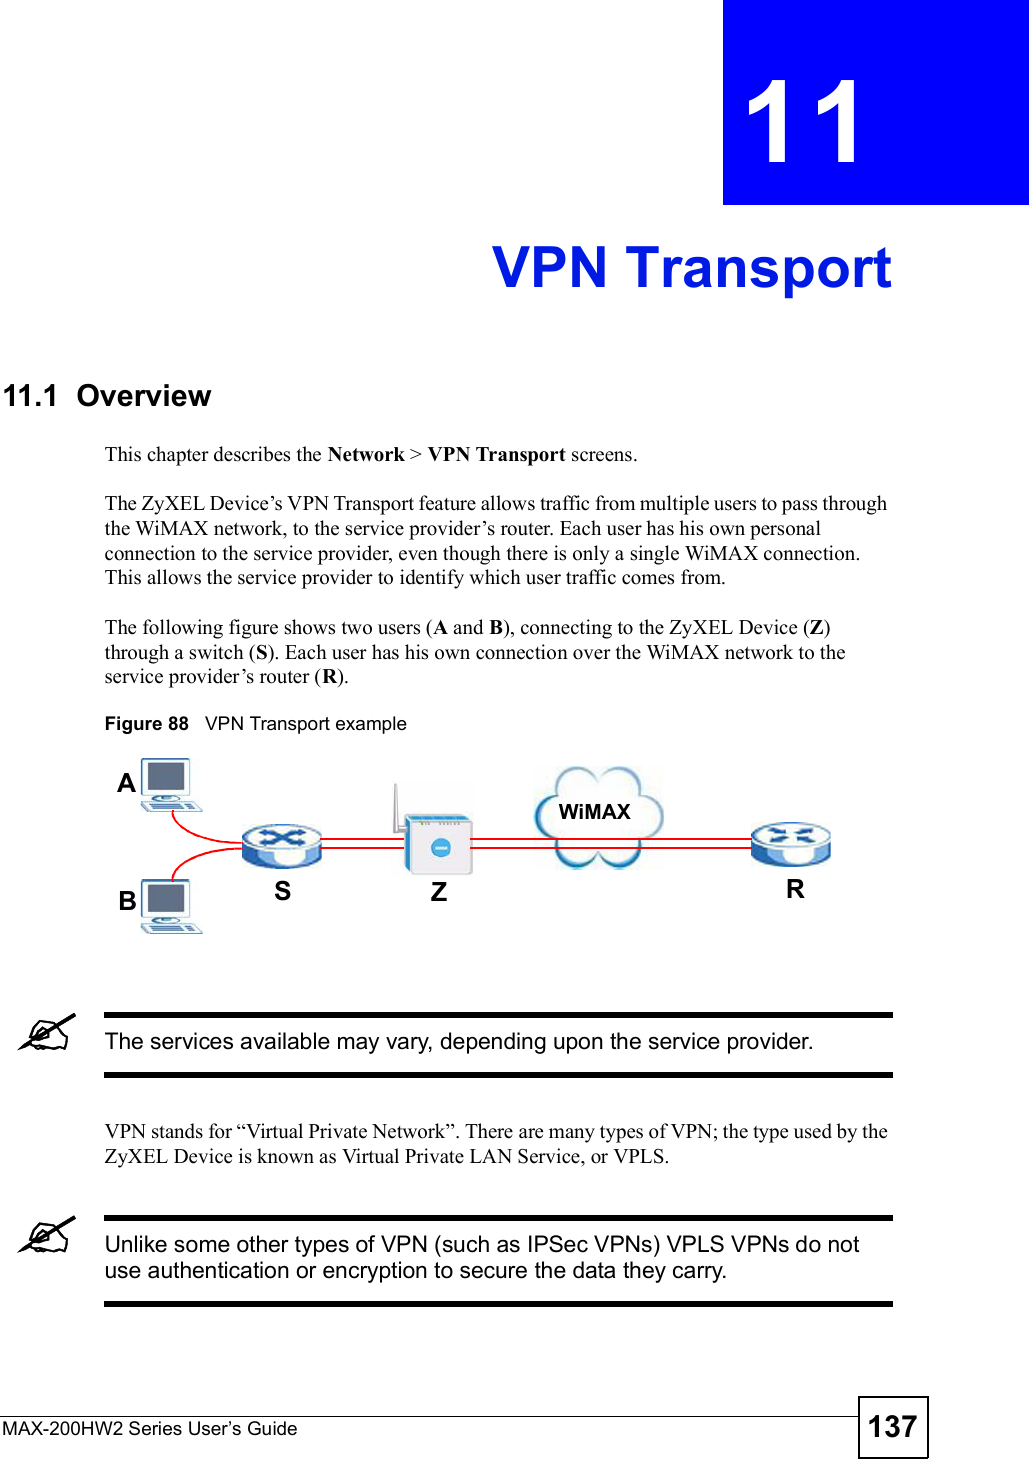 MAX-200HW2 Series User s Guide 137CHAPTER 11 VPN Transport11.1  OverviewThis chapter describes the Network &gt; VPN Transport screens.The ZyXEL Device!s VPN Transport feature allows traffic from multiple users to pass through the WiMAX network, to the service provider!s router. Each user has his own personal connection to the service provider, even though there is only a single WiMAX connection. This allows the service provider to identify which user traffic comes from.The following figure shows two users (A and B), connecting to the ZyXEL Device (Z)through a switch (S). Each user has his own connection over the WiMAX network to the service provider!s router (R).Figure 88   VPN Transport exampleThe services available may vary, depending upon the service provider.VPN stands for &quot;Virtual Private Network#. There are many types of VPN; the type used by the ZyXEL Device is known as Virtual Private LAN Service, or VPLS. Unlike some other types of VPN (such as IPSec VPNs) VPLS VPNs do not use authentication or encryption to secure the data they carry. ABSZRWiMAX